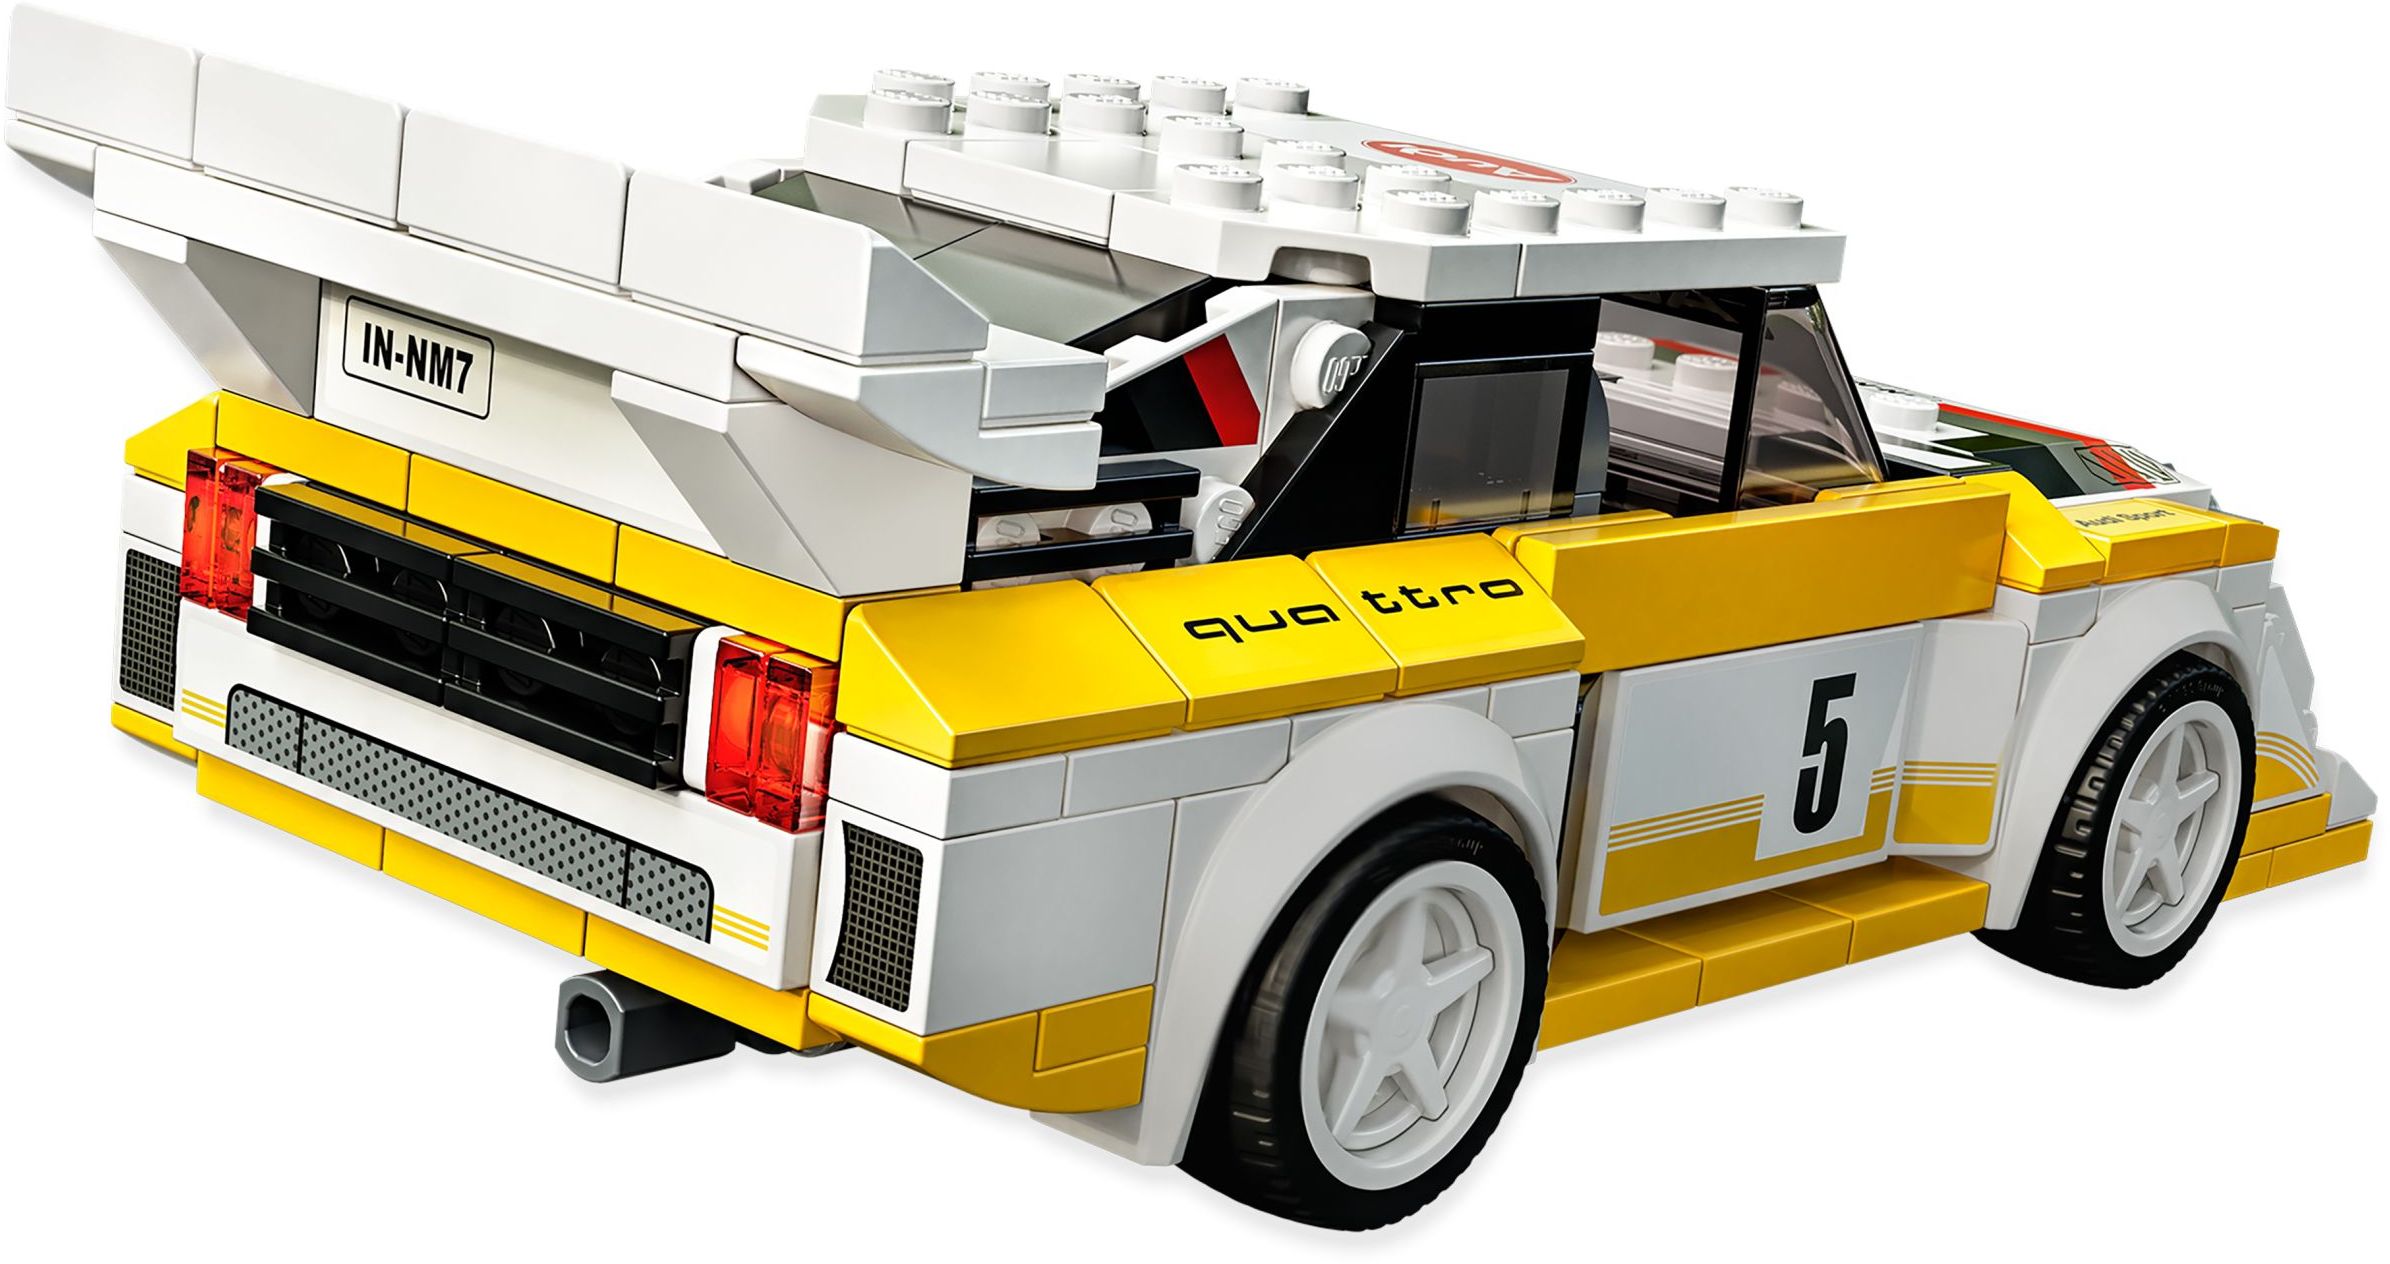 New 2020 LEGO Speed Champions 1985 Audi Sport Quattro S1 76897 Toy Cars for Kids Building Kit Featuring Driver Minifigure 250 Pieces